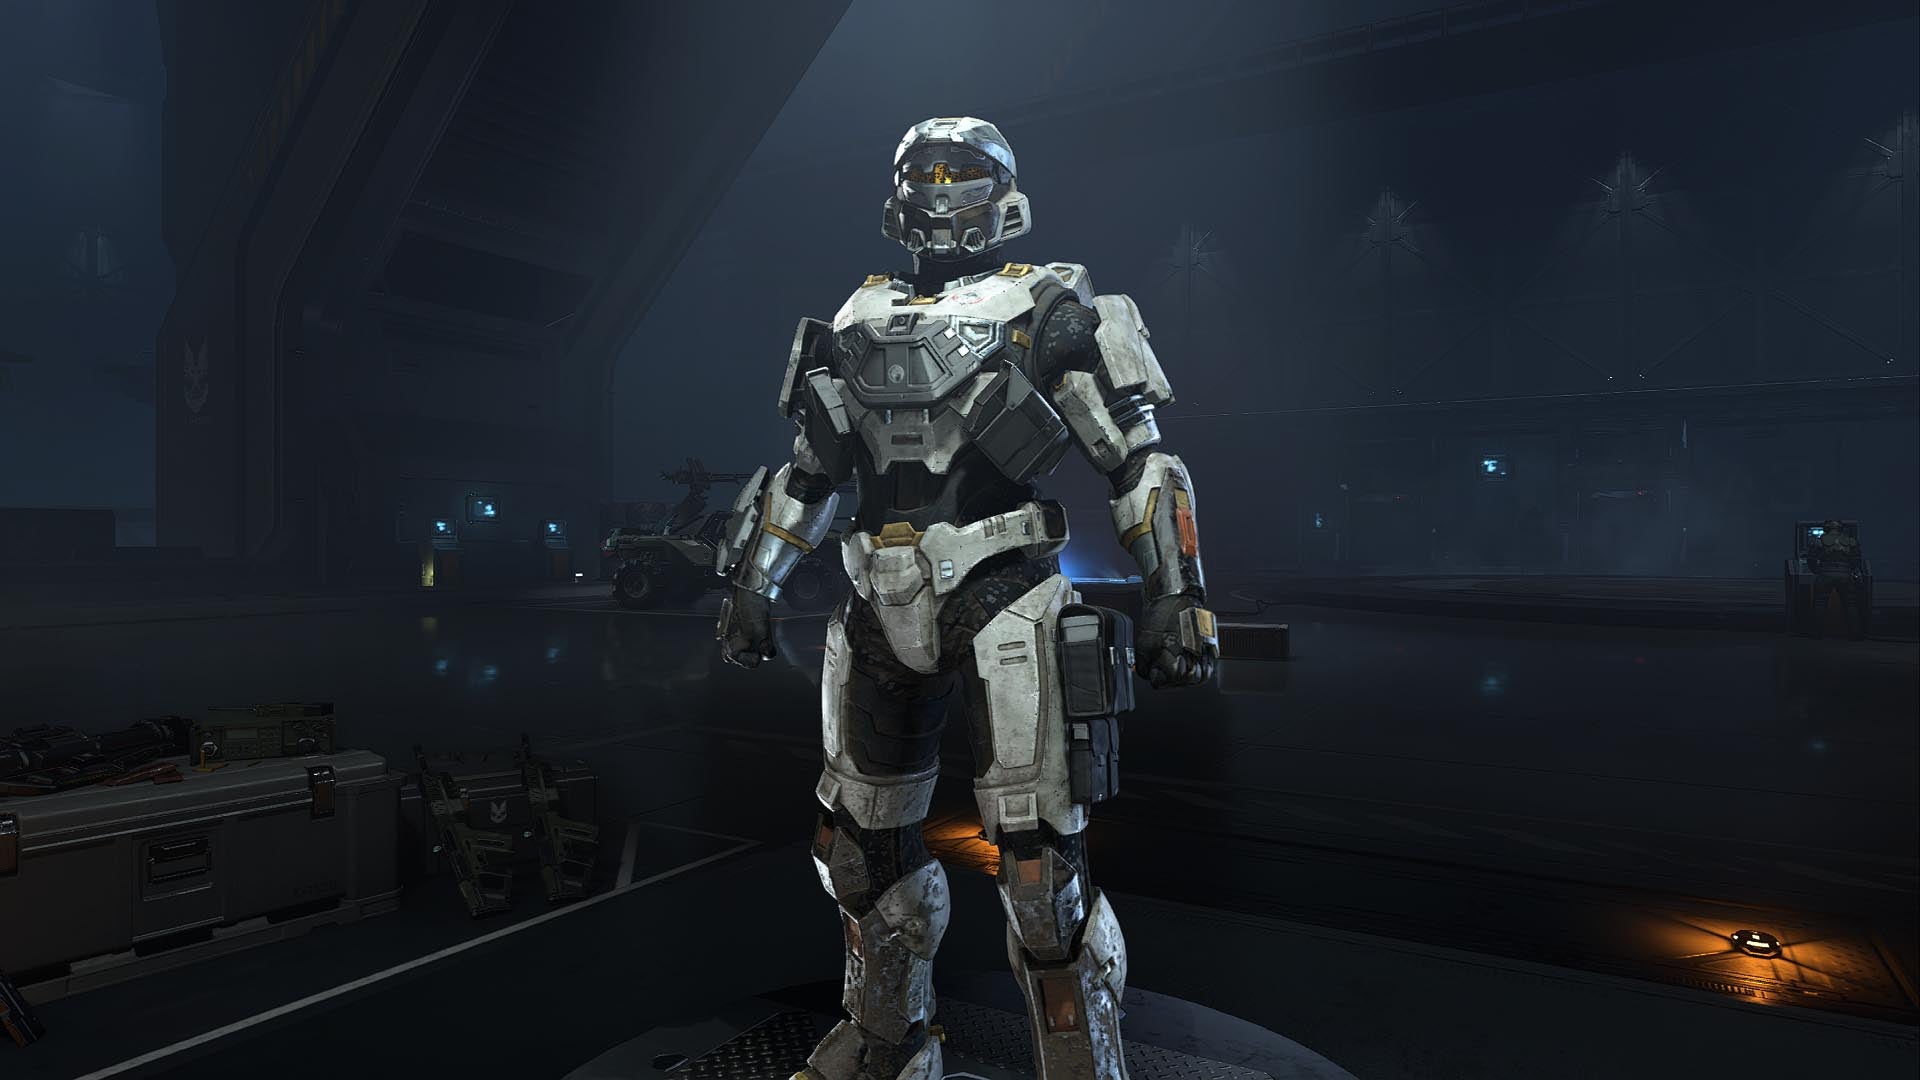 The Halo Infinite Players Who Look Amazing Without Spending A Penny